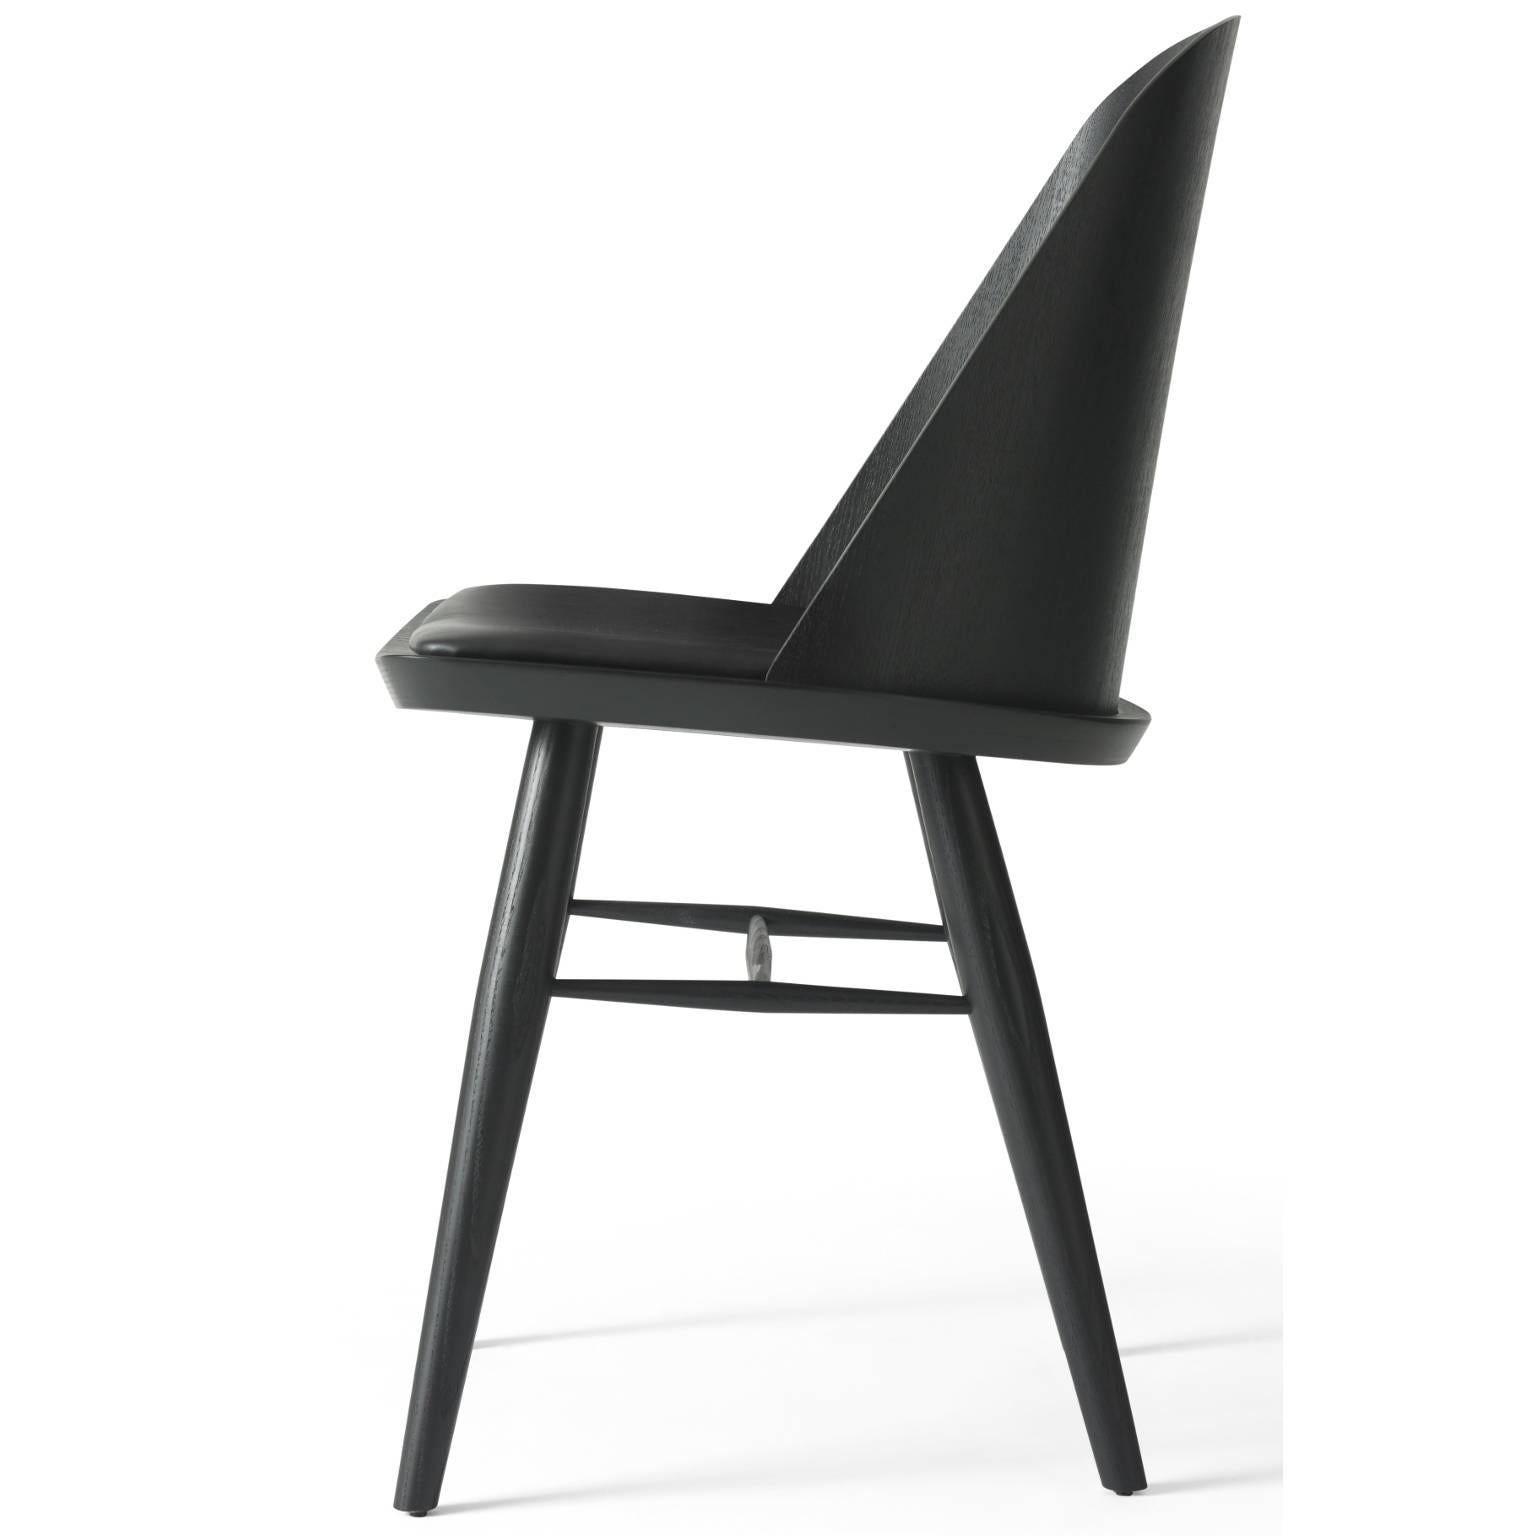 Less is more with Synnes chair, a distinctively modern take on the classic Scandinavian dining chair from one of the region's most exciting young designers, Falke Svatun. The chair came to life when the Norwegian had the idea of inserting a sheet of